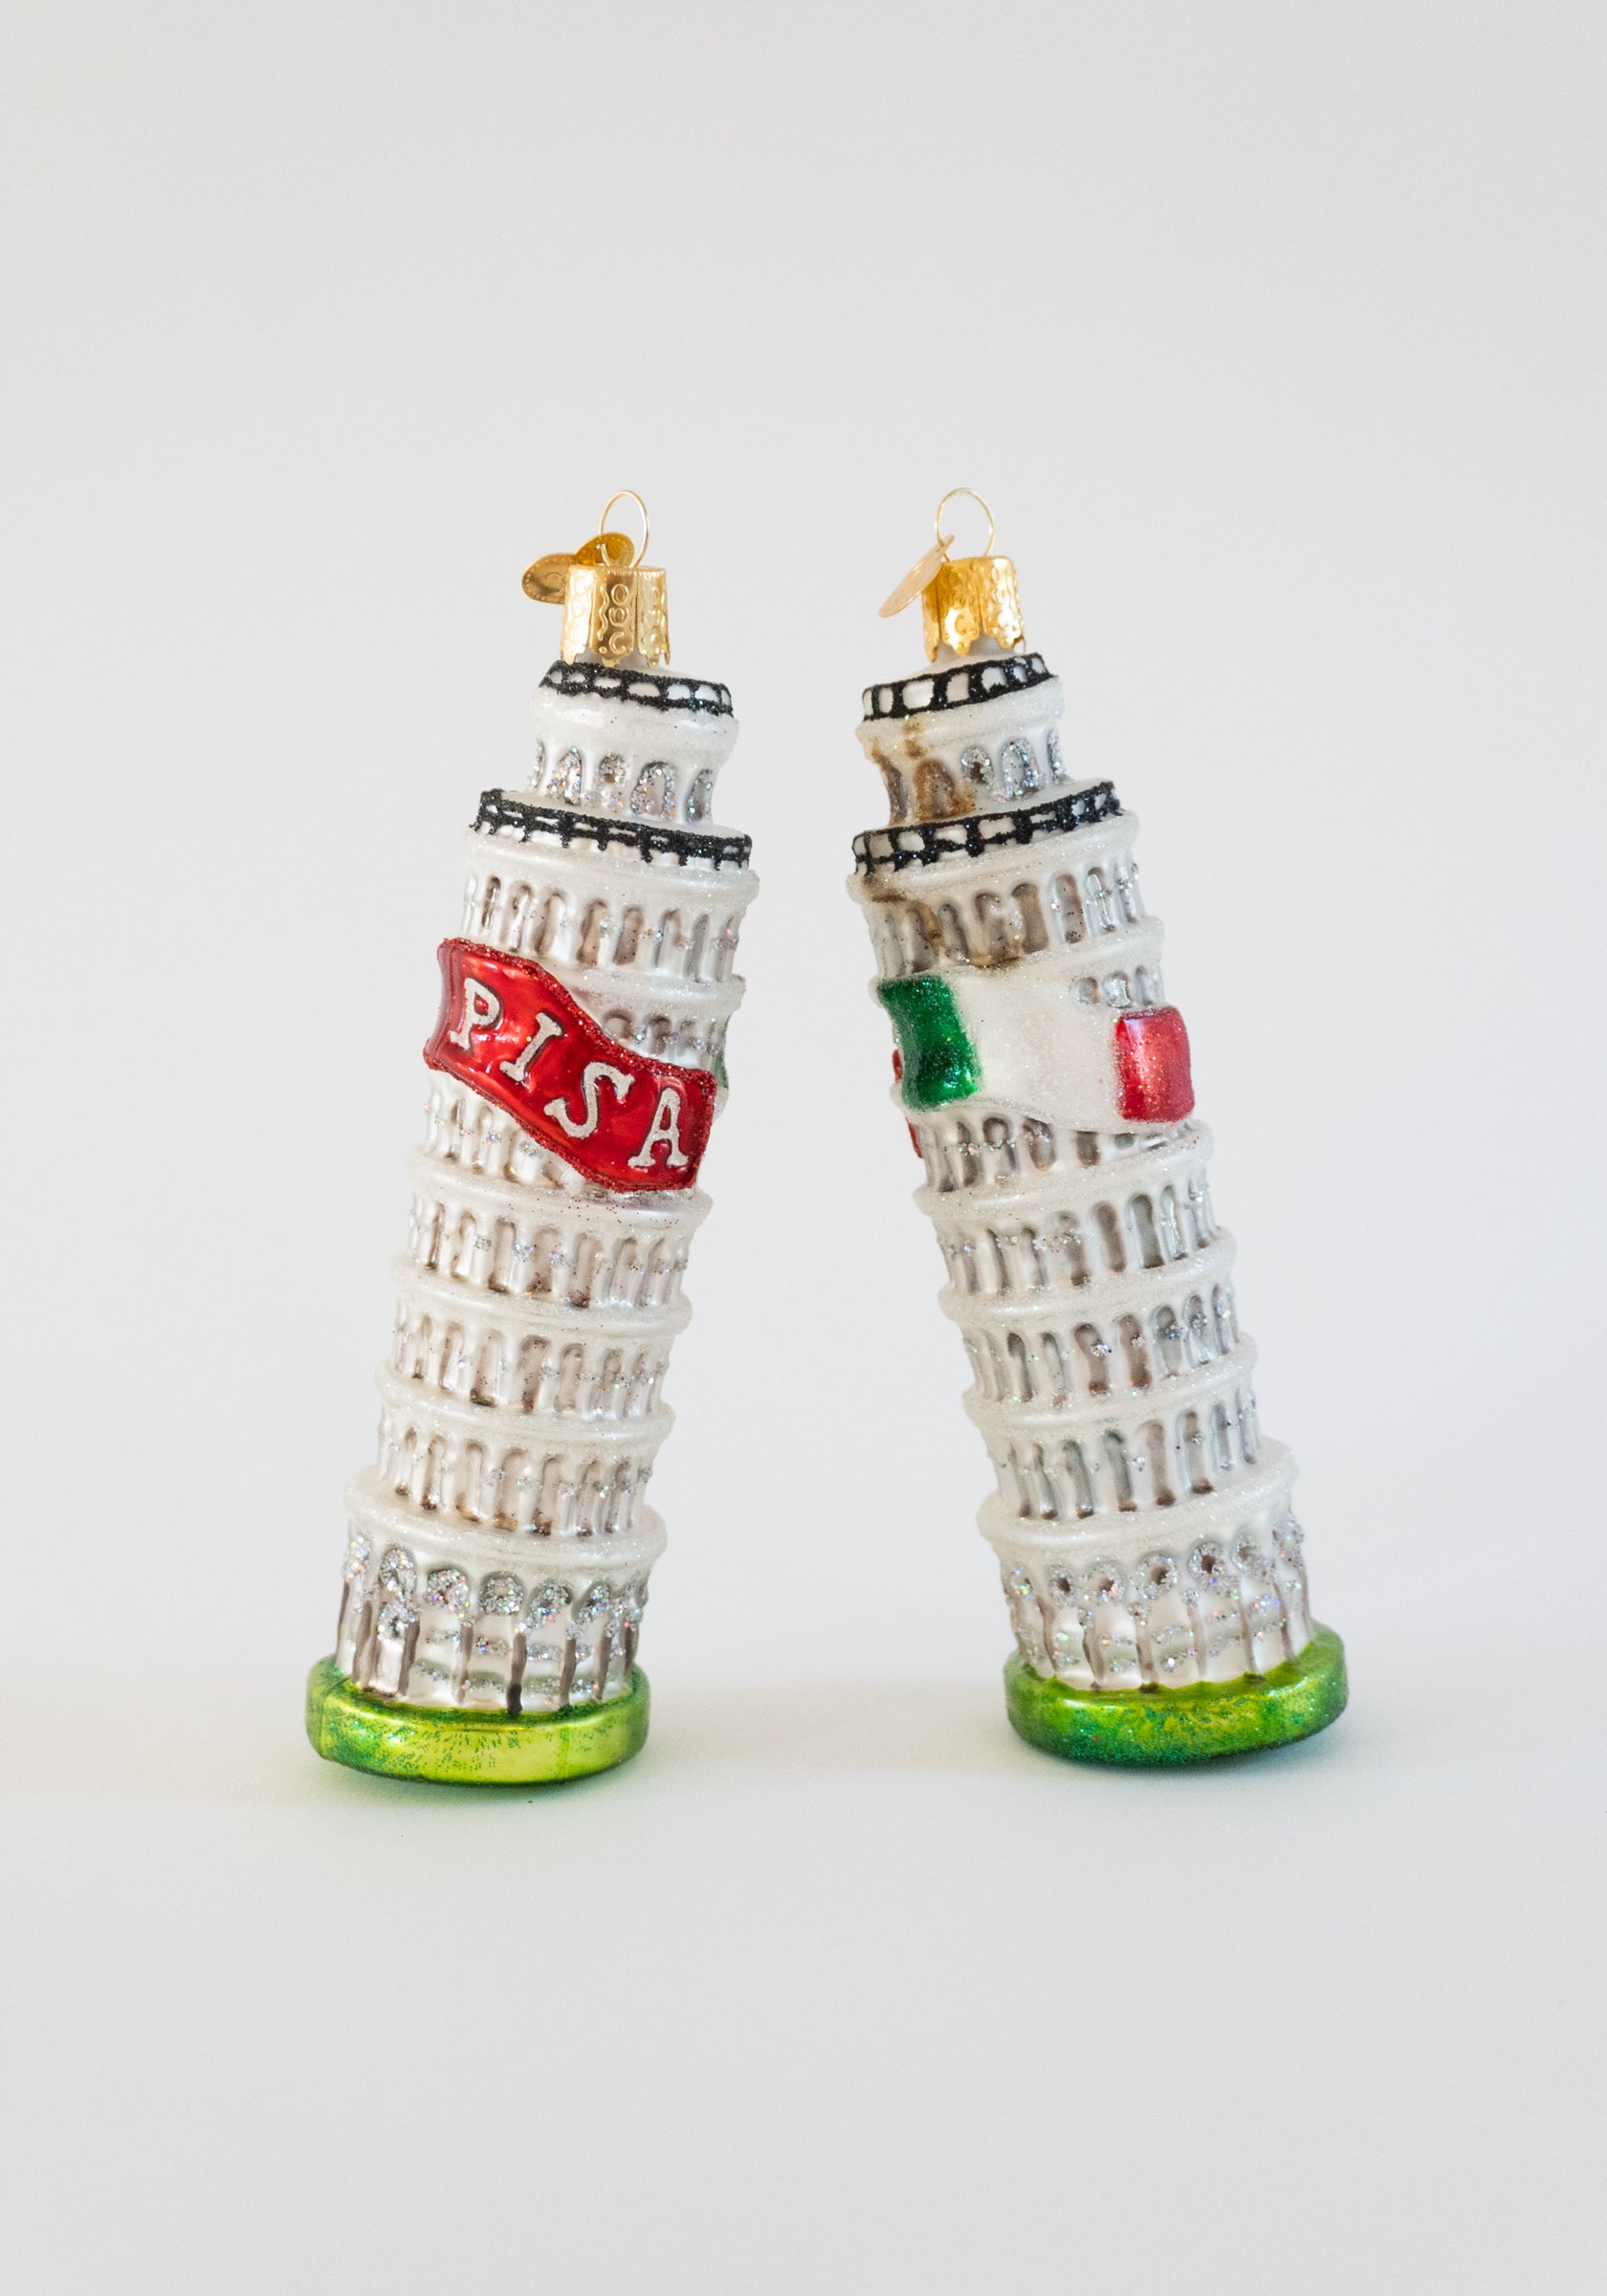 Leaning Tower of Pisa Ornament